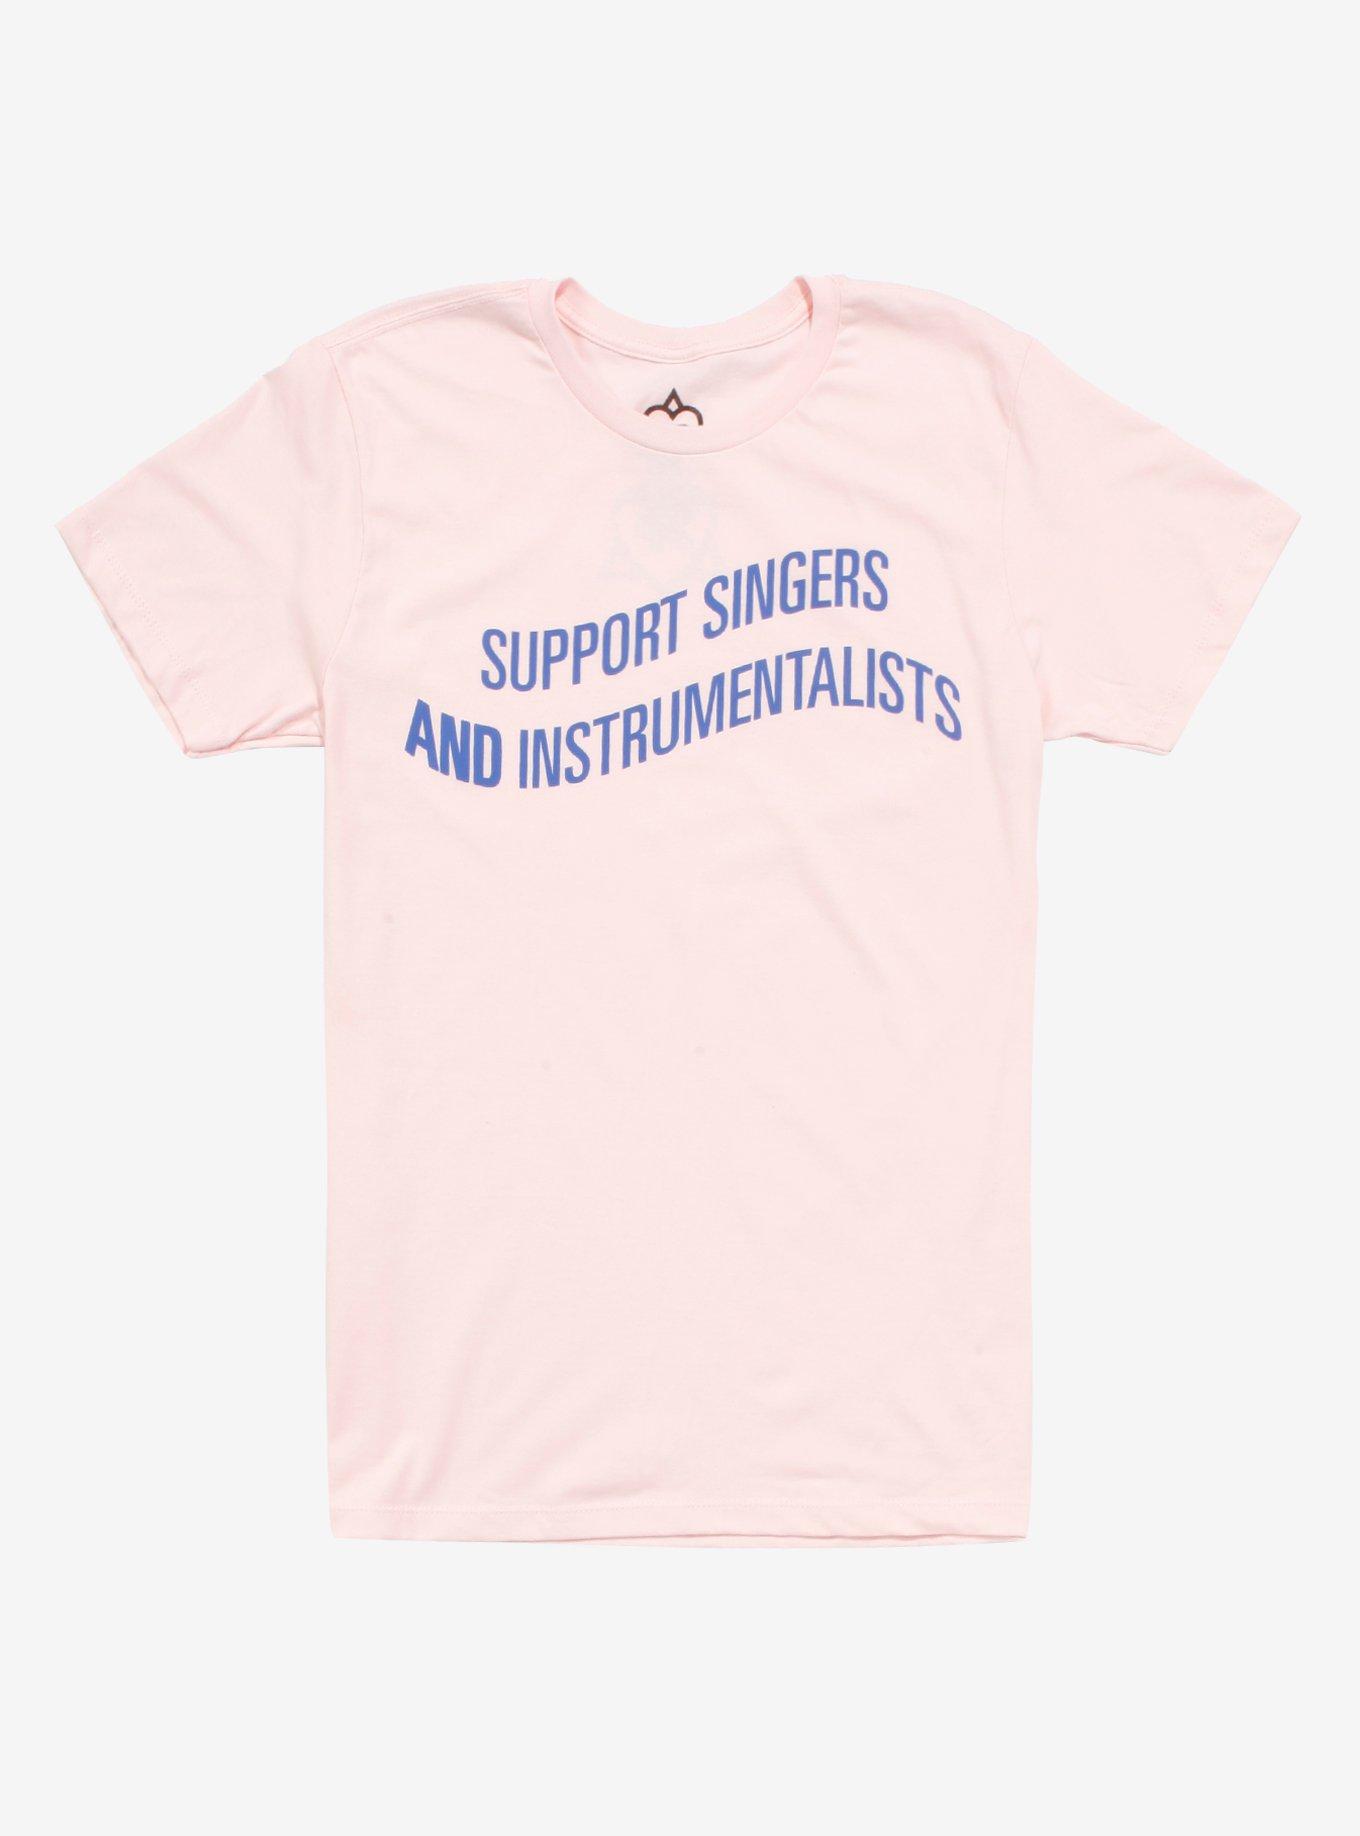 Jessie Paege Support Singers T-Shirt Hot Topic Exclusive, PINK, hi-res